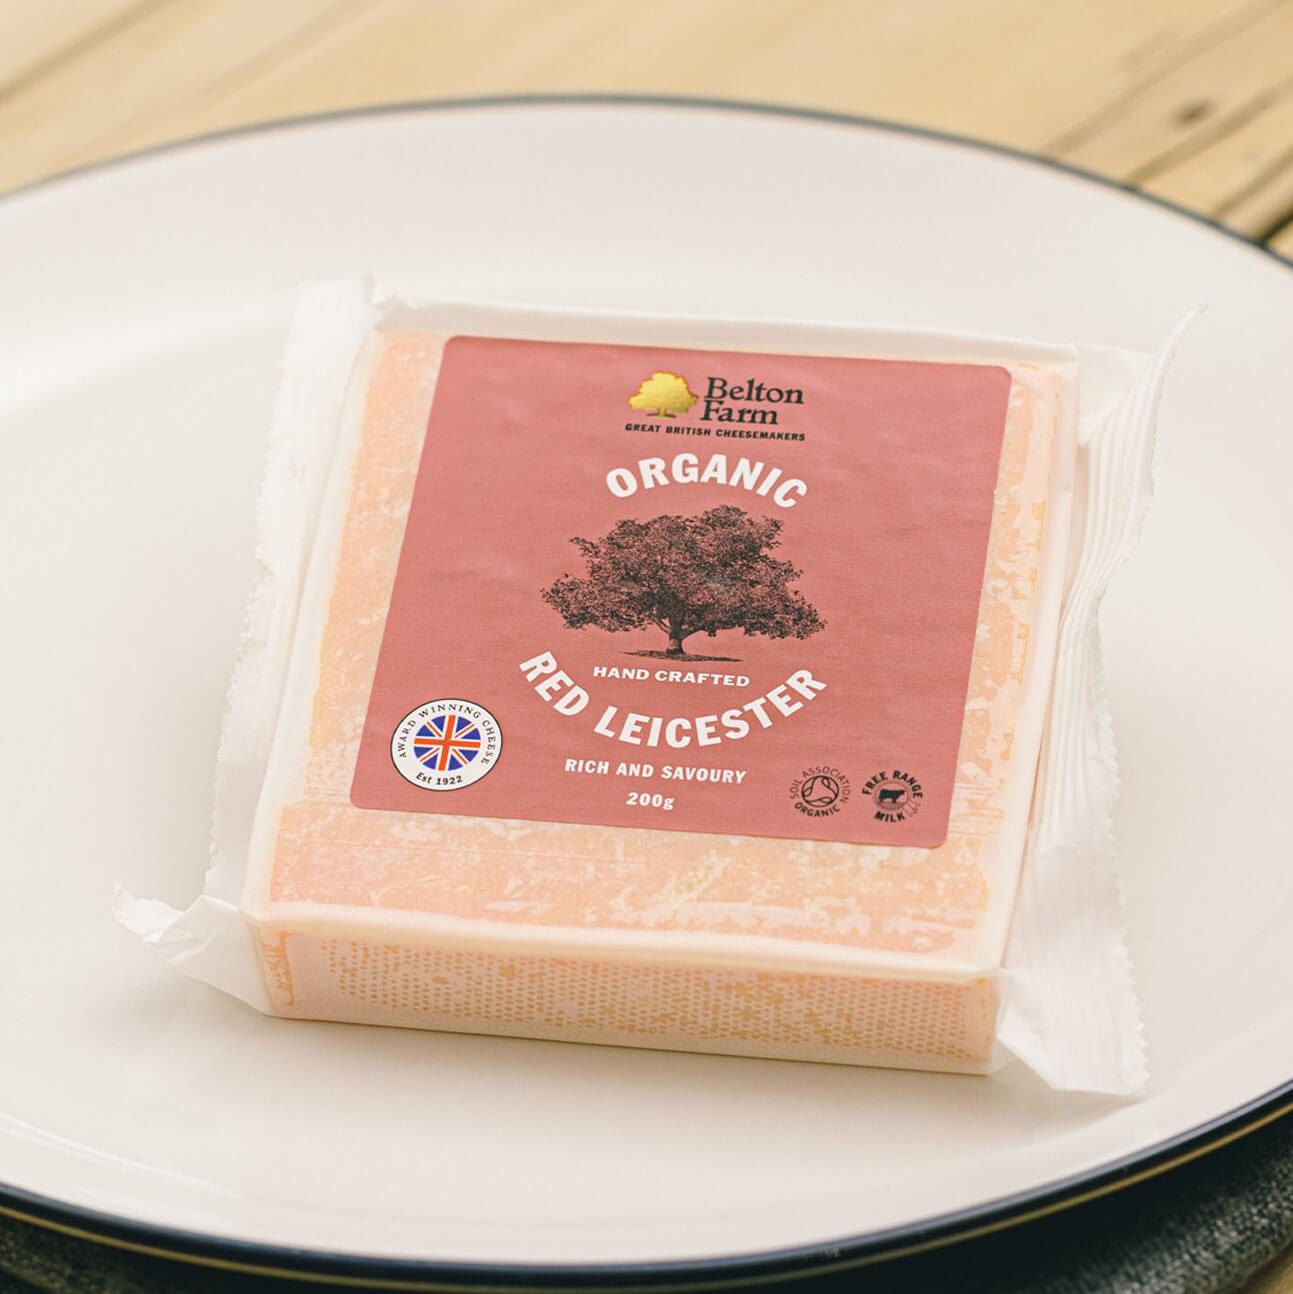 Image of Organic Red Leicester made in the UK by Belton Farm. Buying this product supports a UK business, jobs and the local community